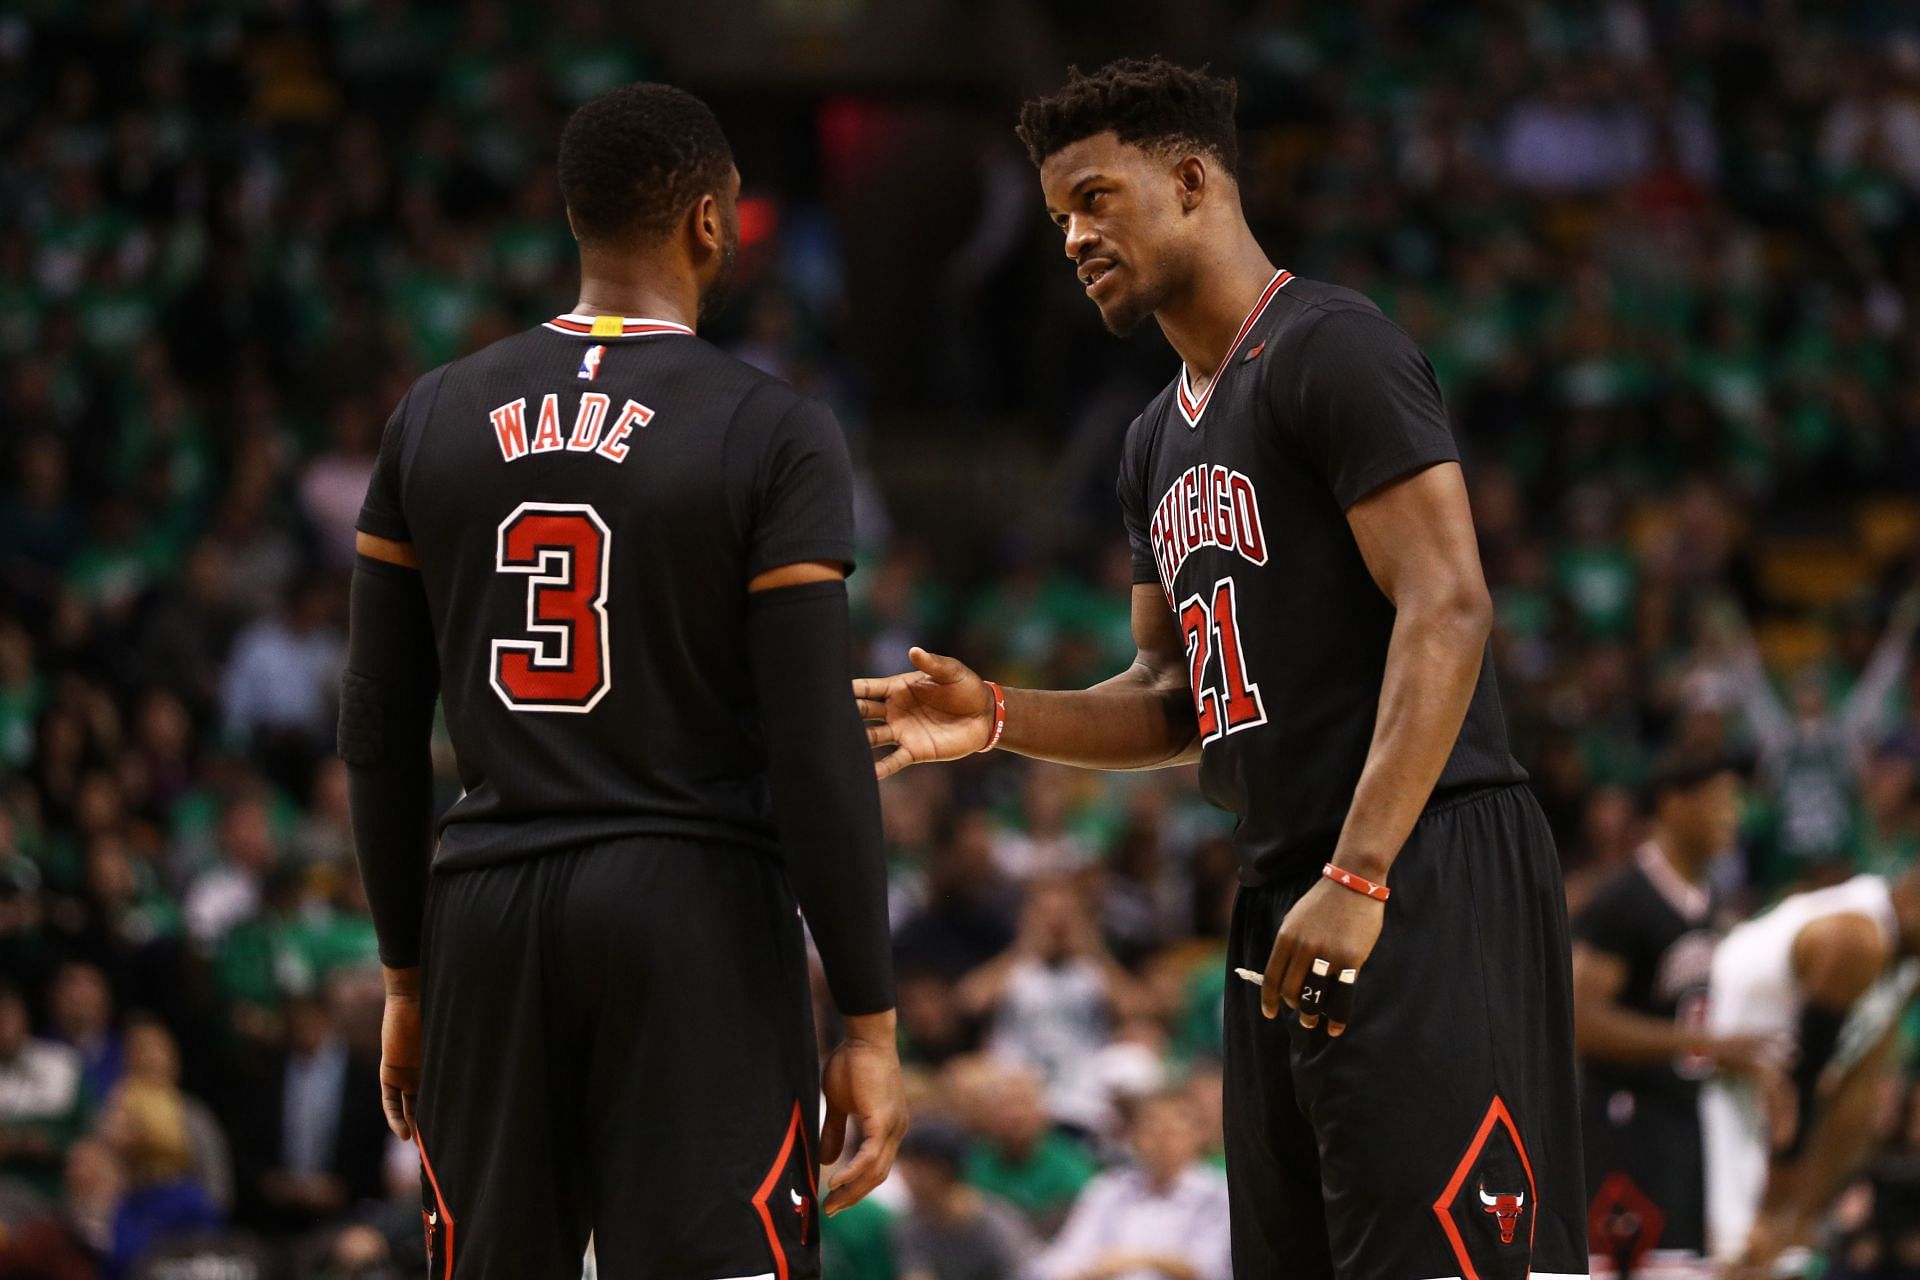 Jimmy Butler and Dwayne Wade were teammates while playing with the Chicago Bulls